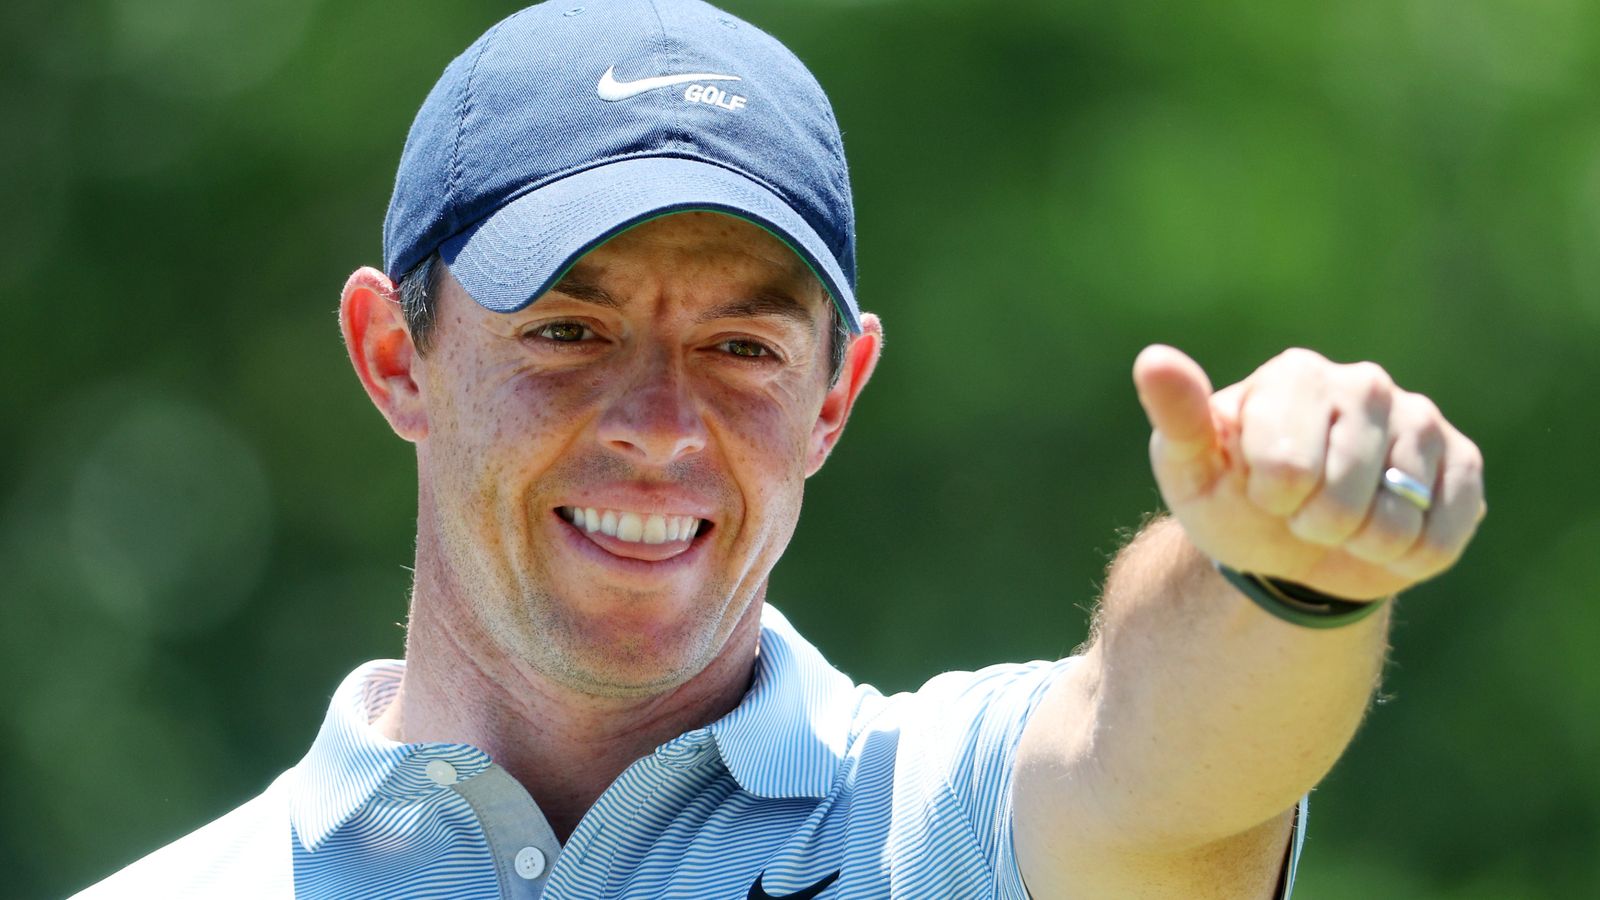 US Open: Rory McIlroy buoyed by Canadian Open success as he looks to end major drought in Brookline